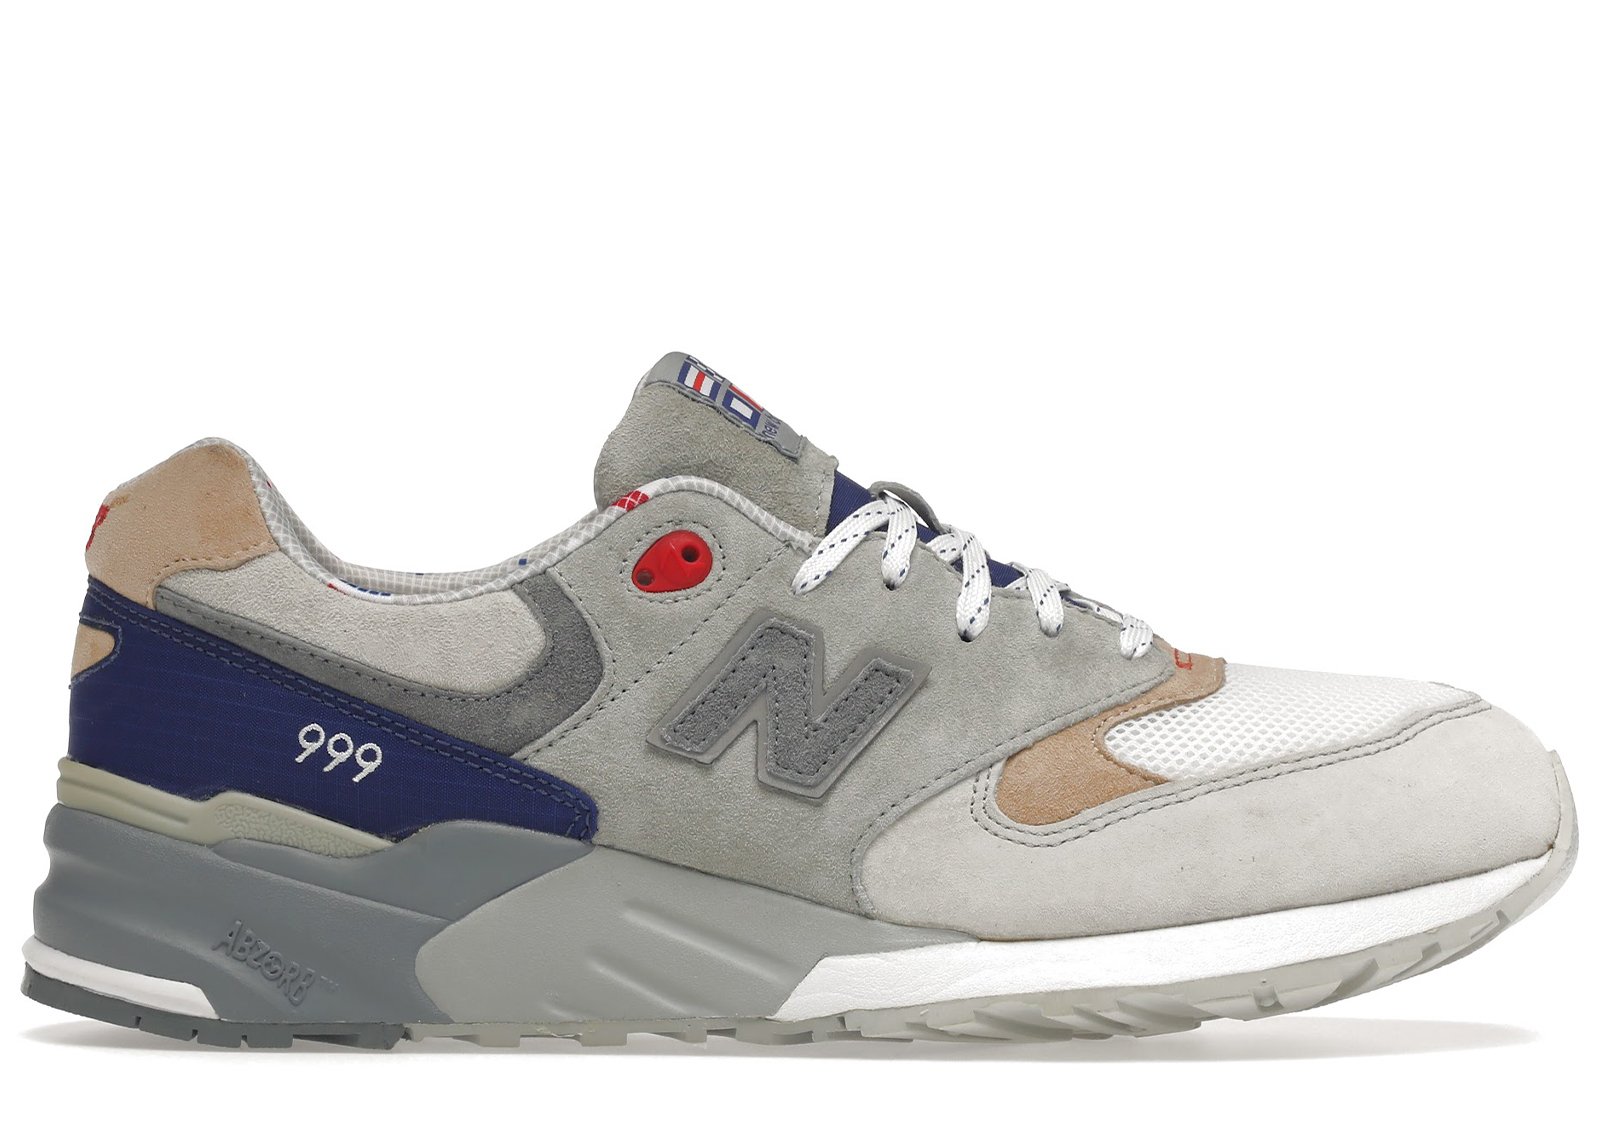 New Balance 999 Concepts "The Kennedy" sneakers